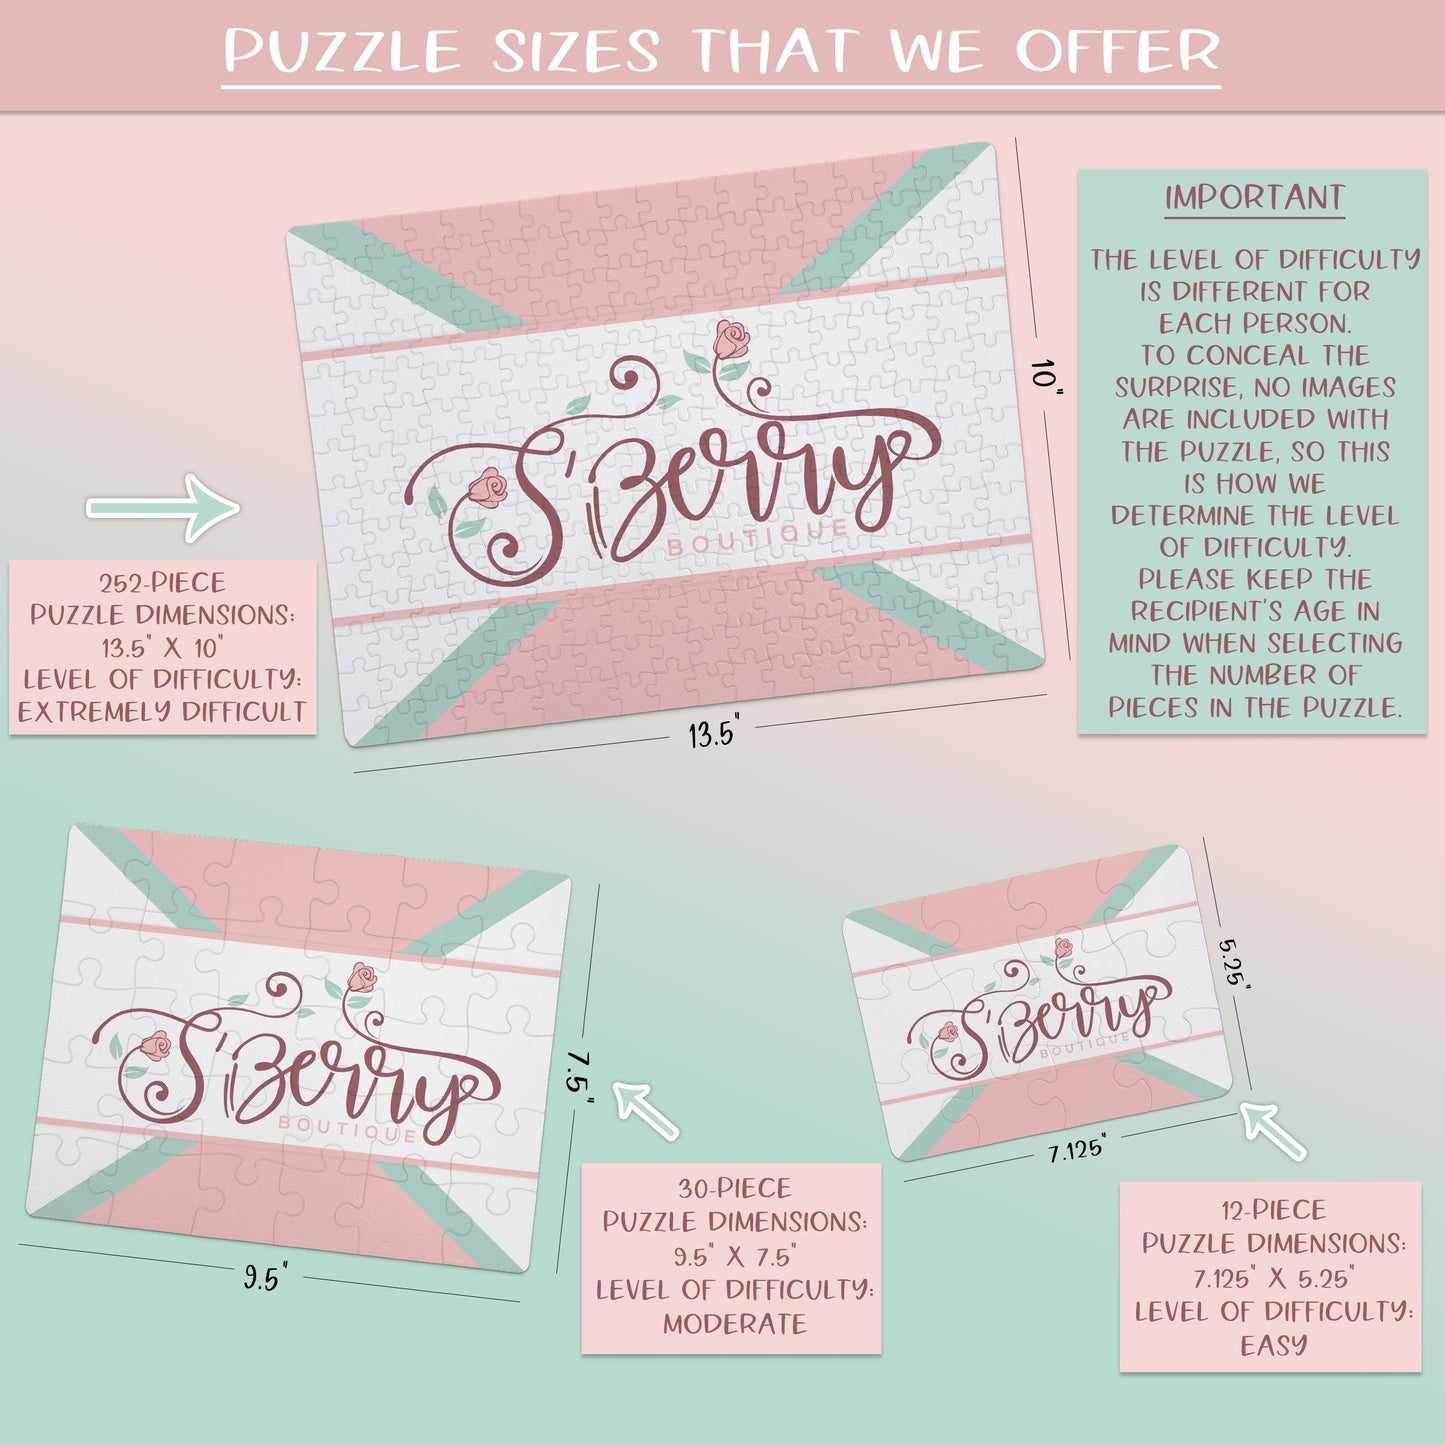 Create Your Own Puzzle - Floral Design - CYOP0050 | S'Berry Boutique